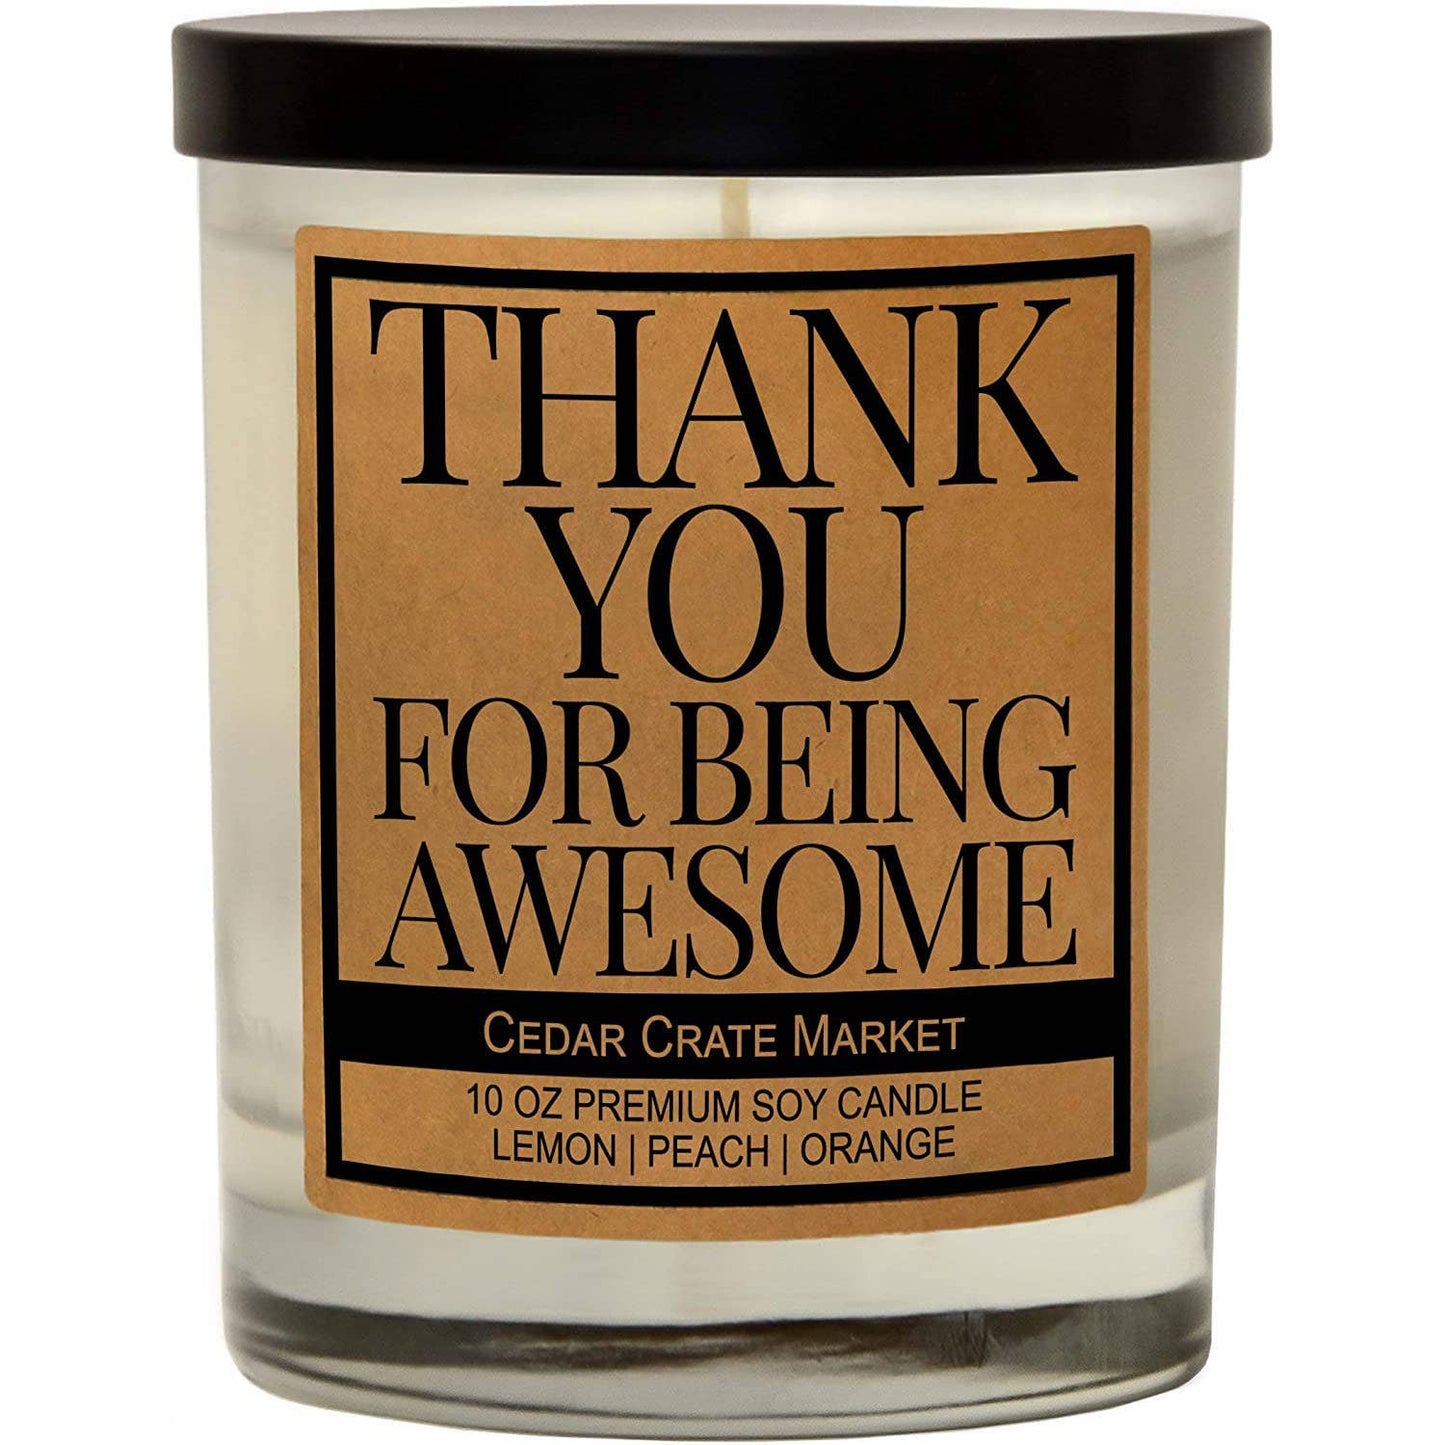 Thank You for Being Awesome Soy Candle Core Cedar Crate Market